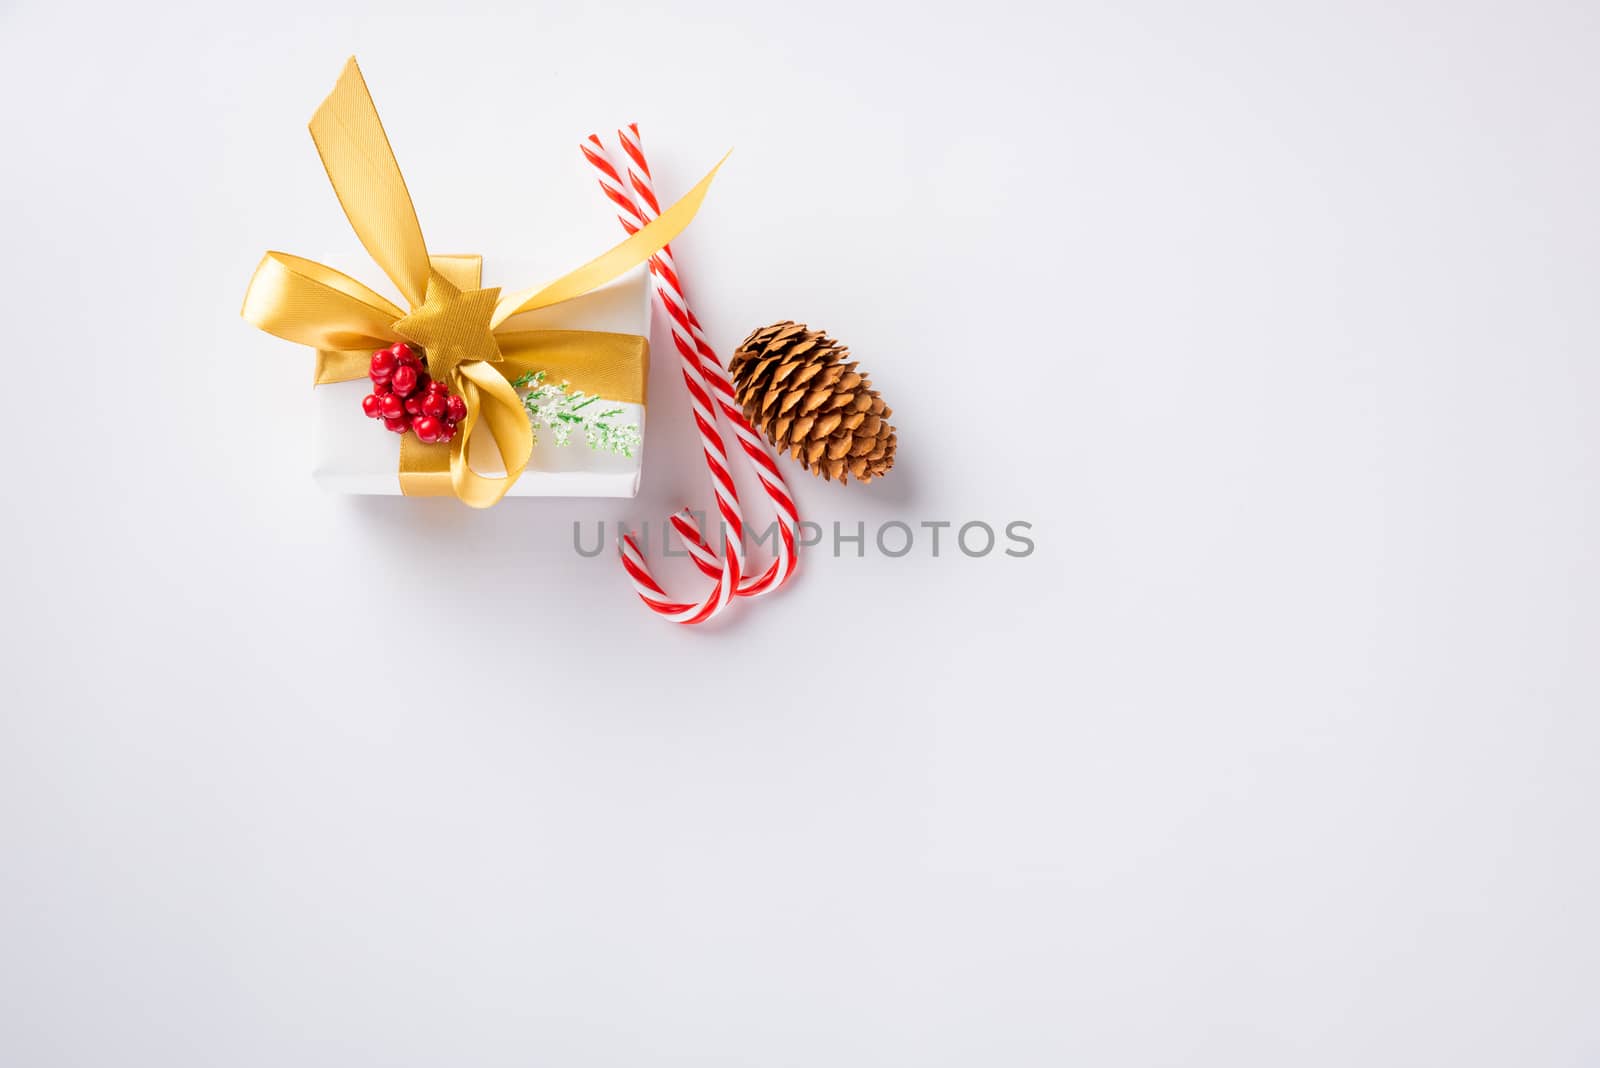 with a gift box and gold ribbon by Sorapop